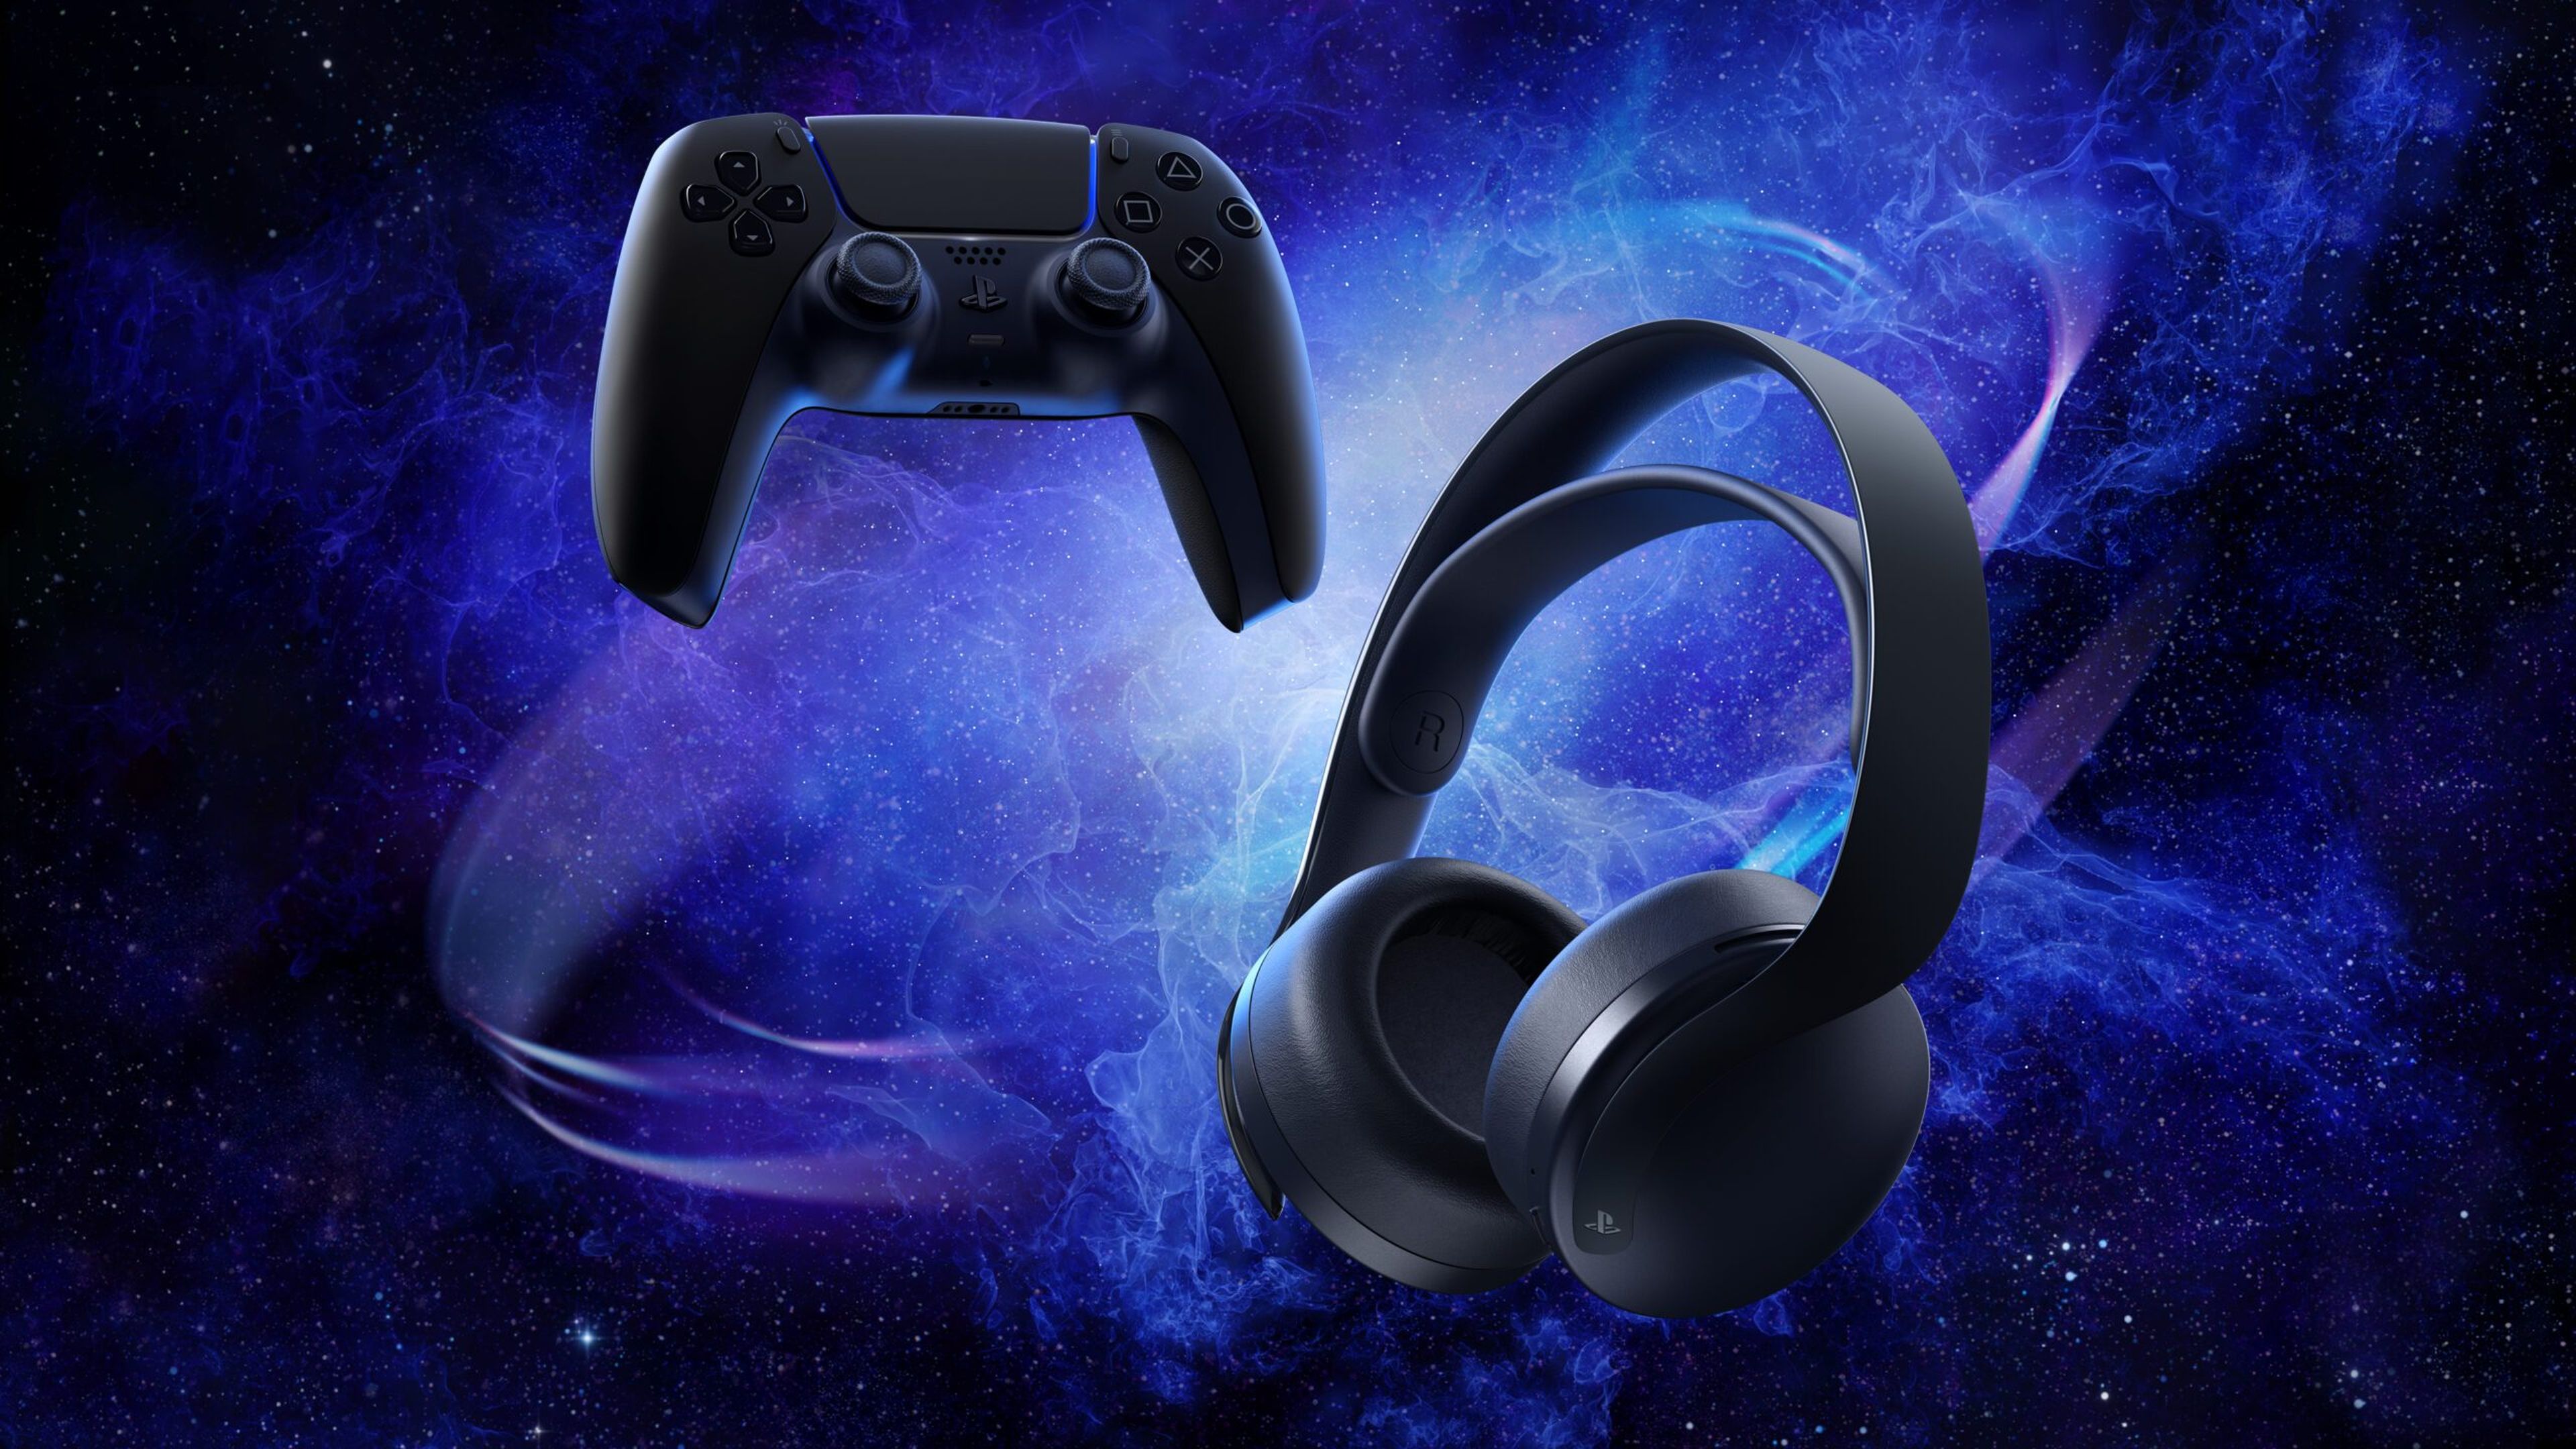 Auriculares Ps5 Pulse 3d Inalambrico Midnight Black